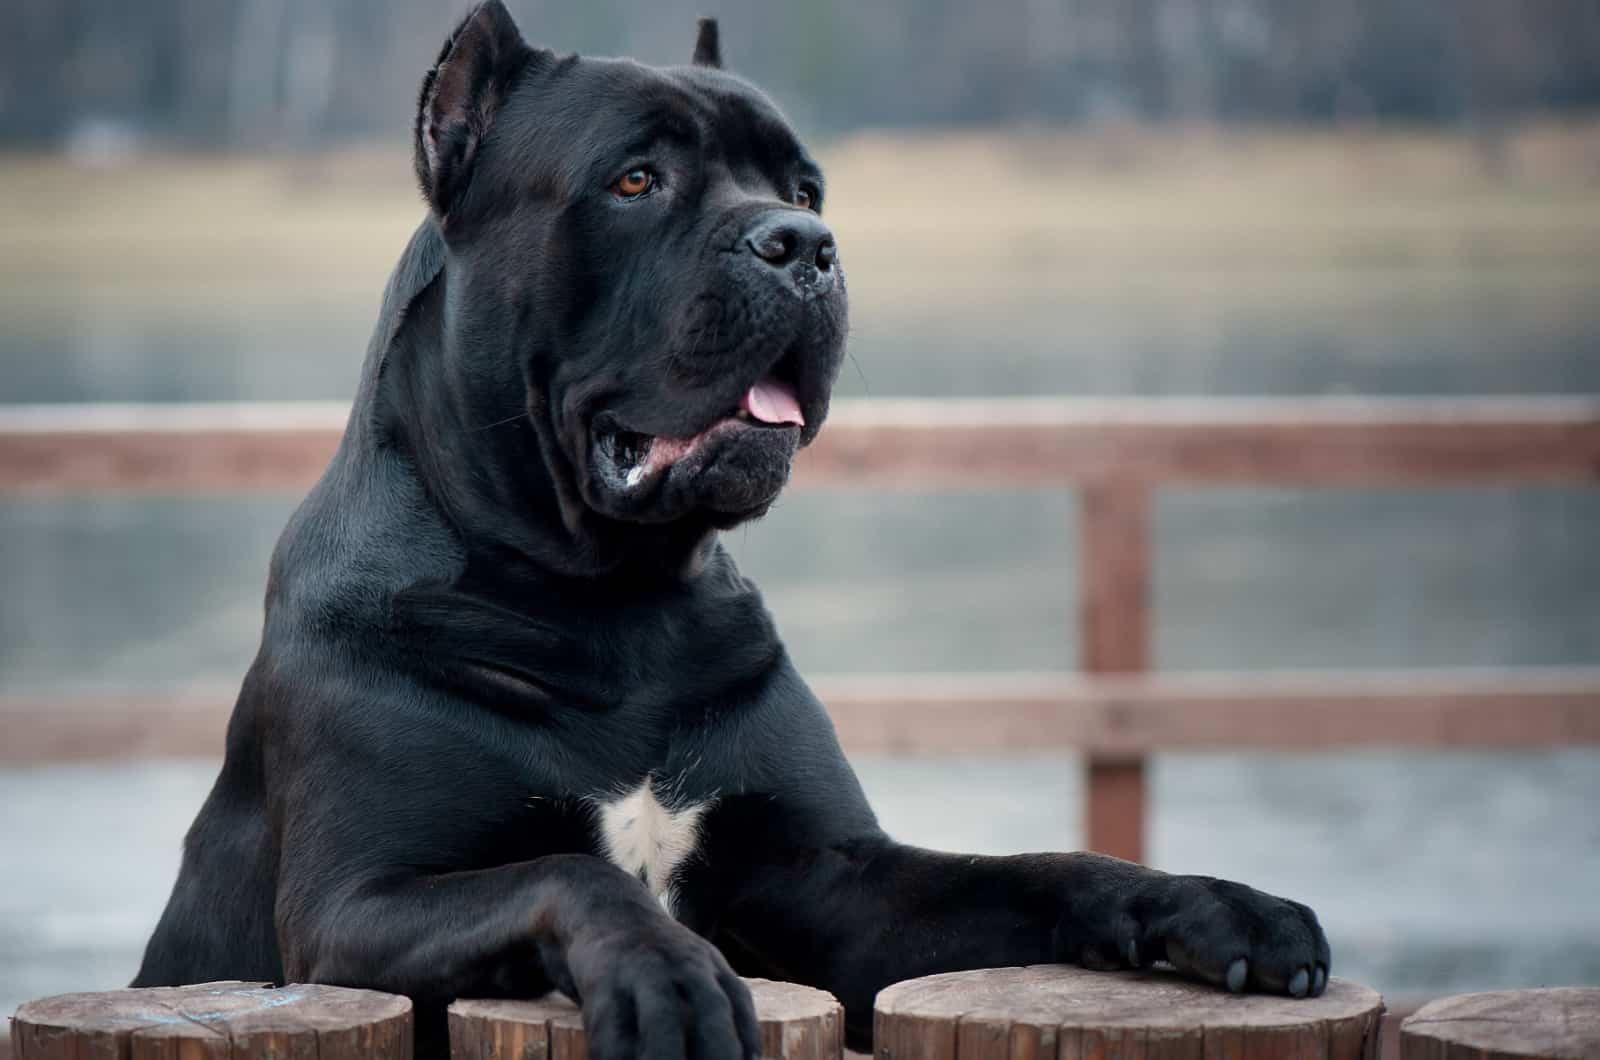 cane corso with black coat and amber eyes